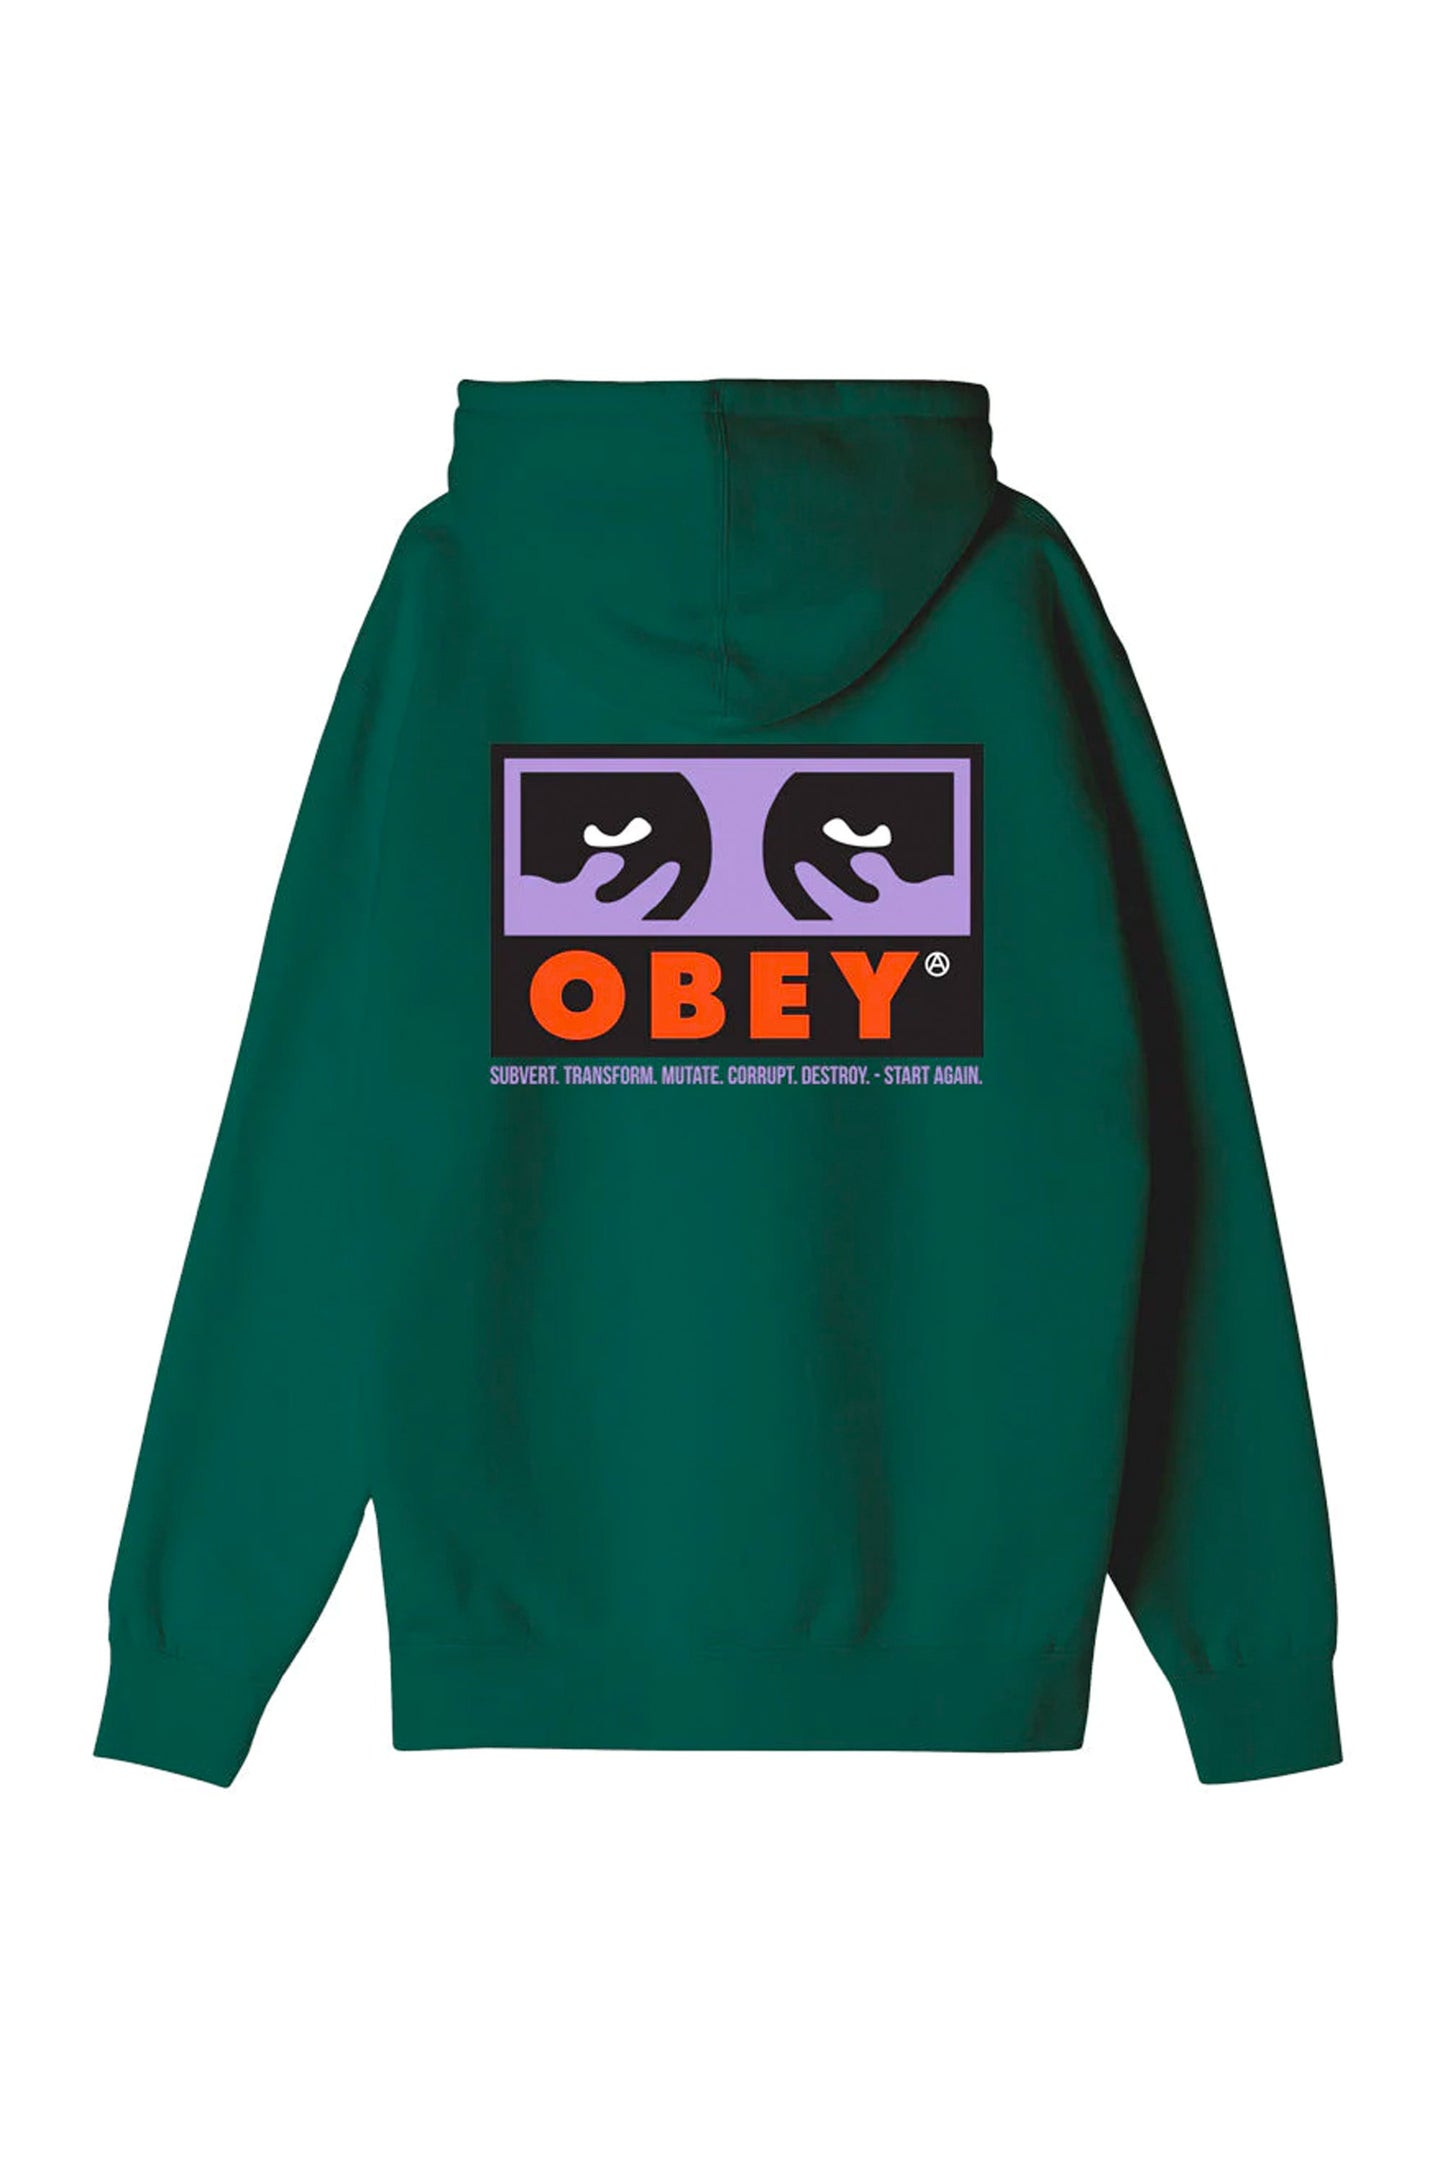 Pukas-Surf-Shop-Obey-Sweater-Obey-subvert-green